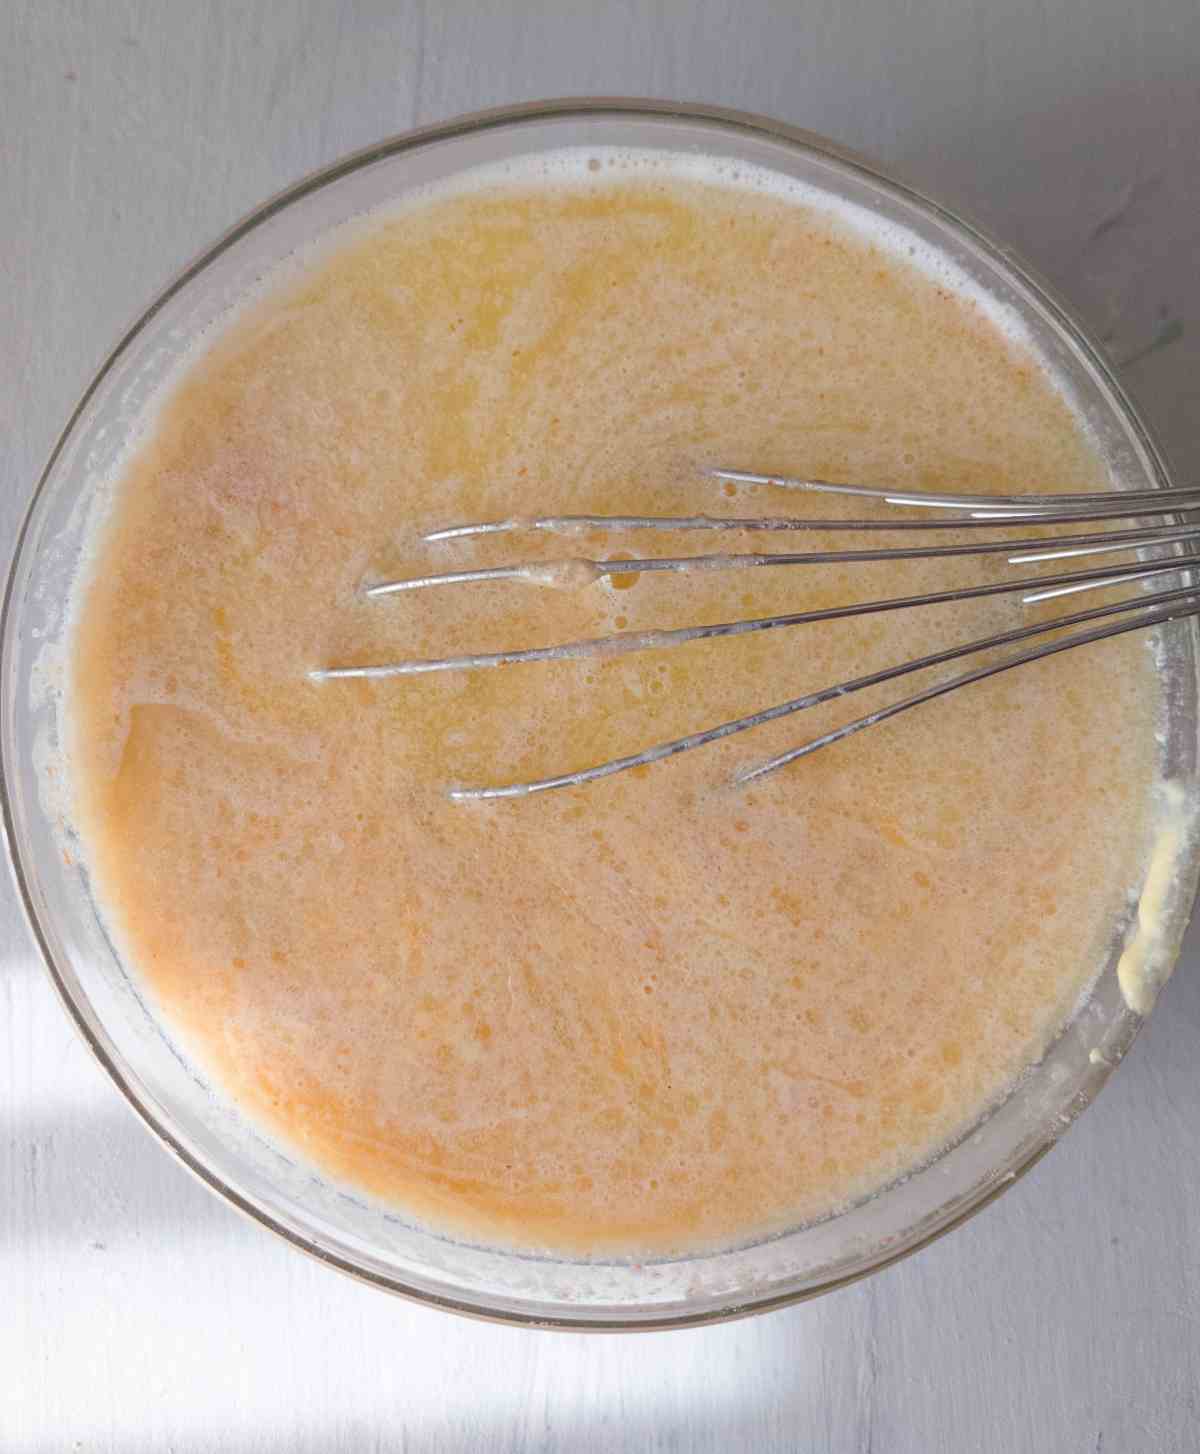 Wet ingredients in a glass bowl with a whisk.